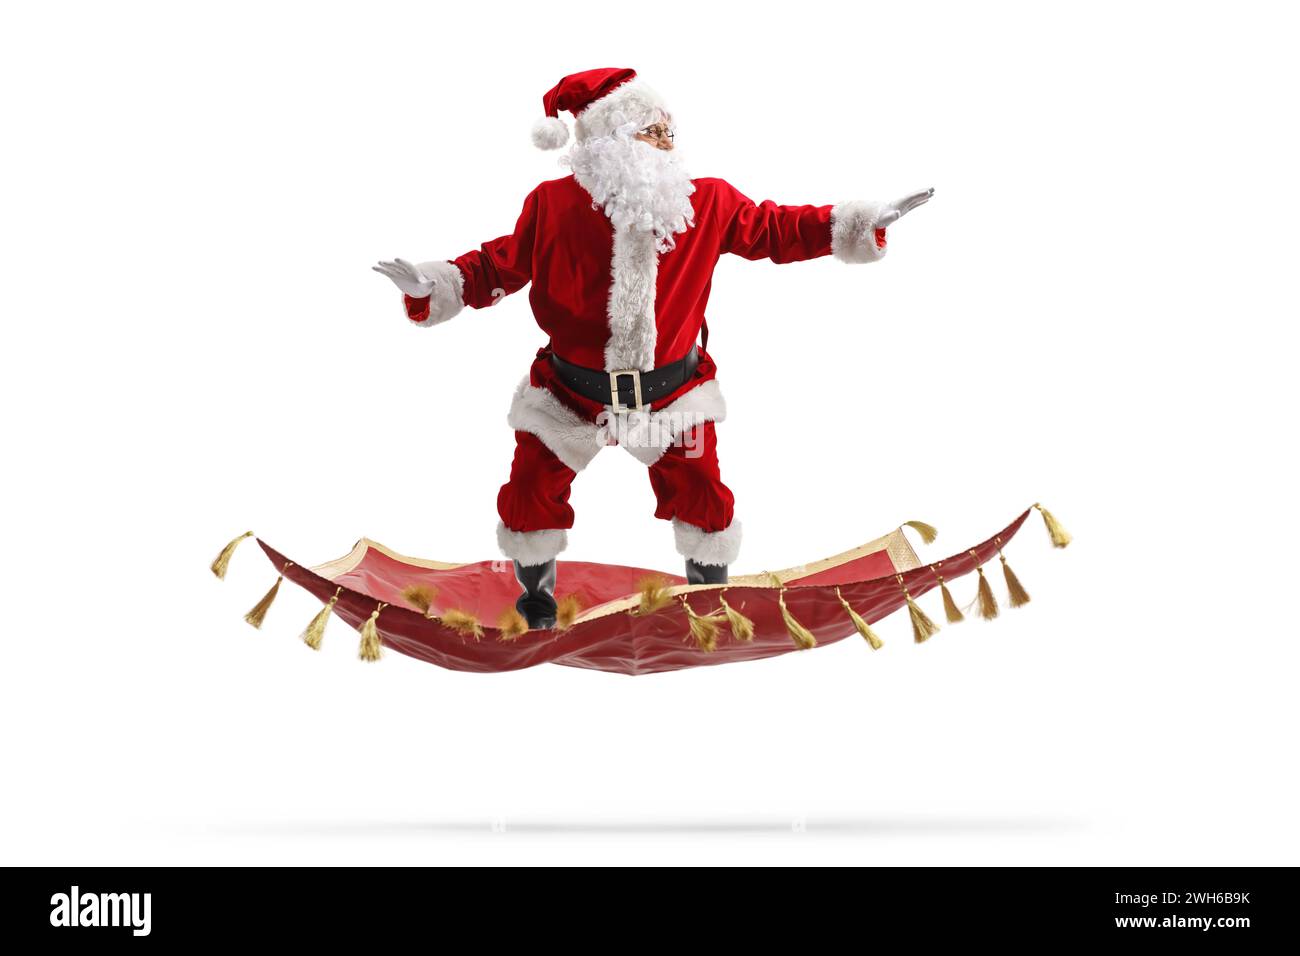 Santa claus flying on a magic carpet isolated on white background Stock Photo